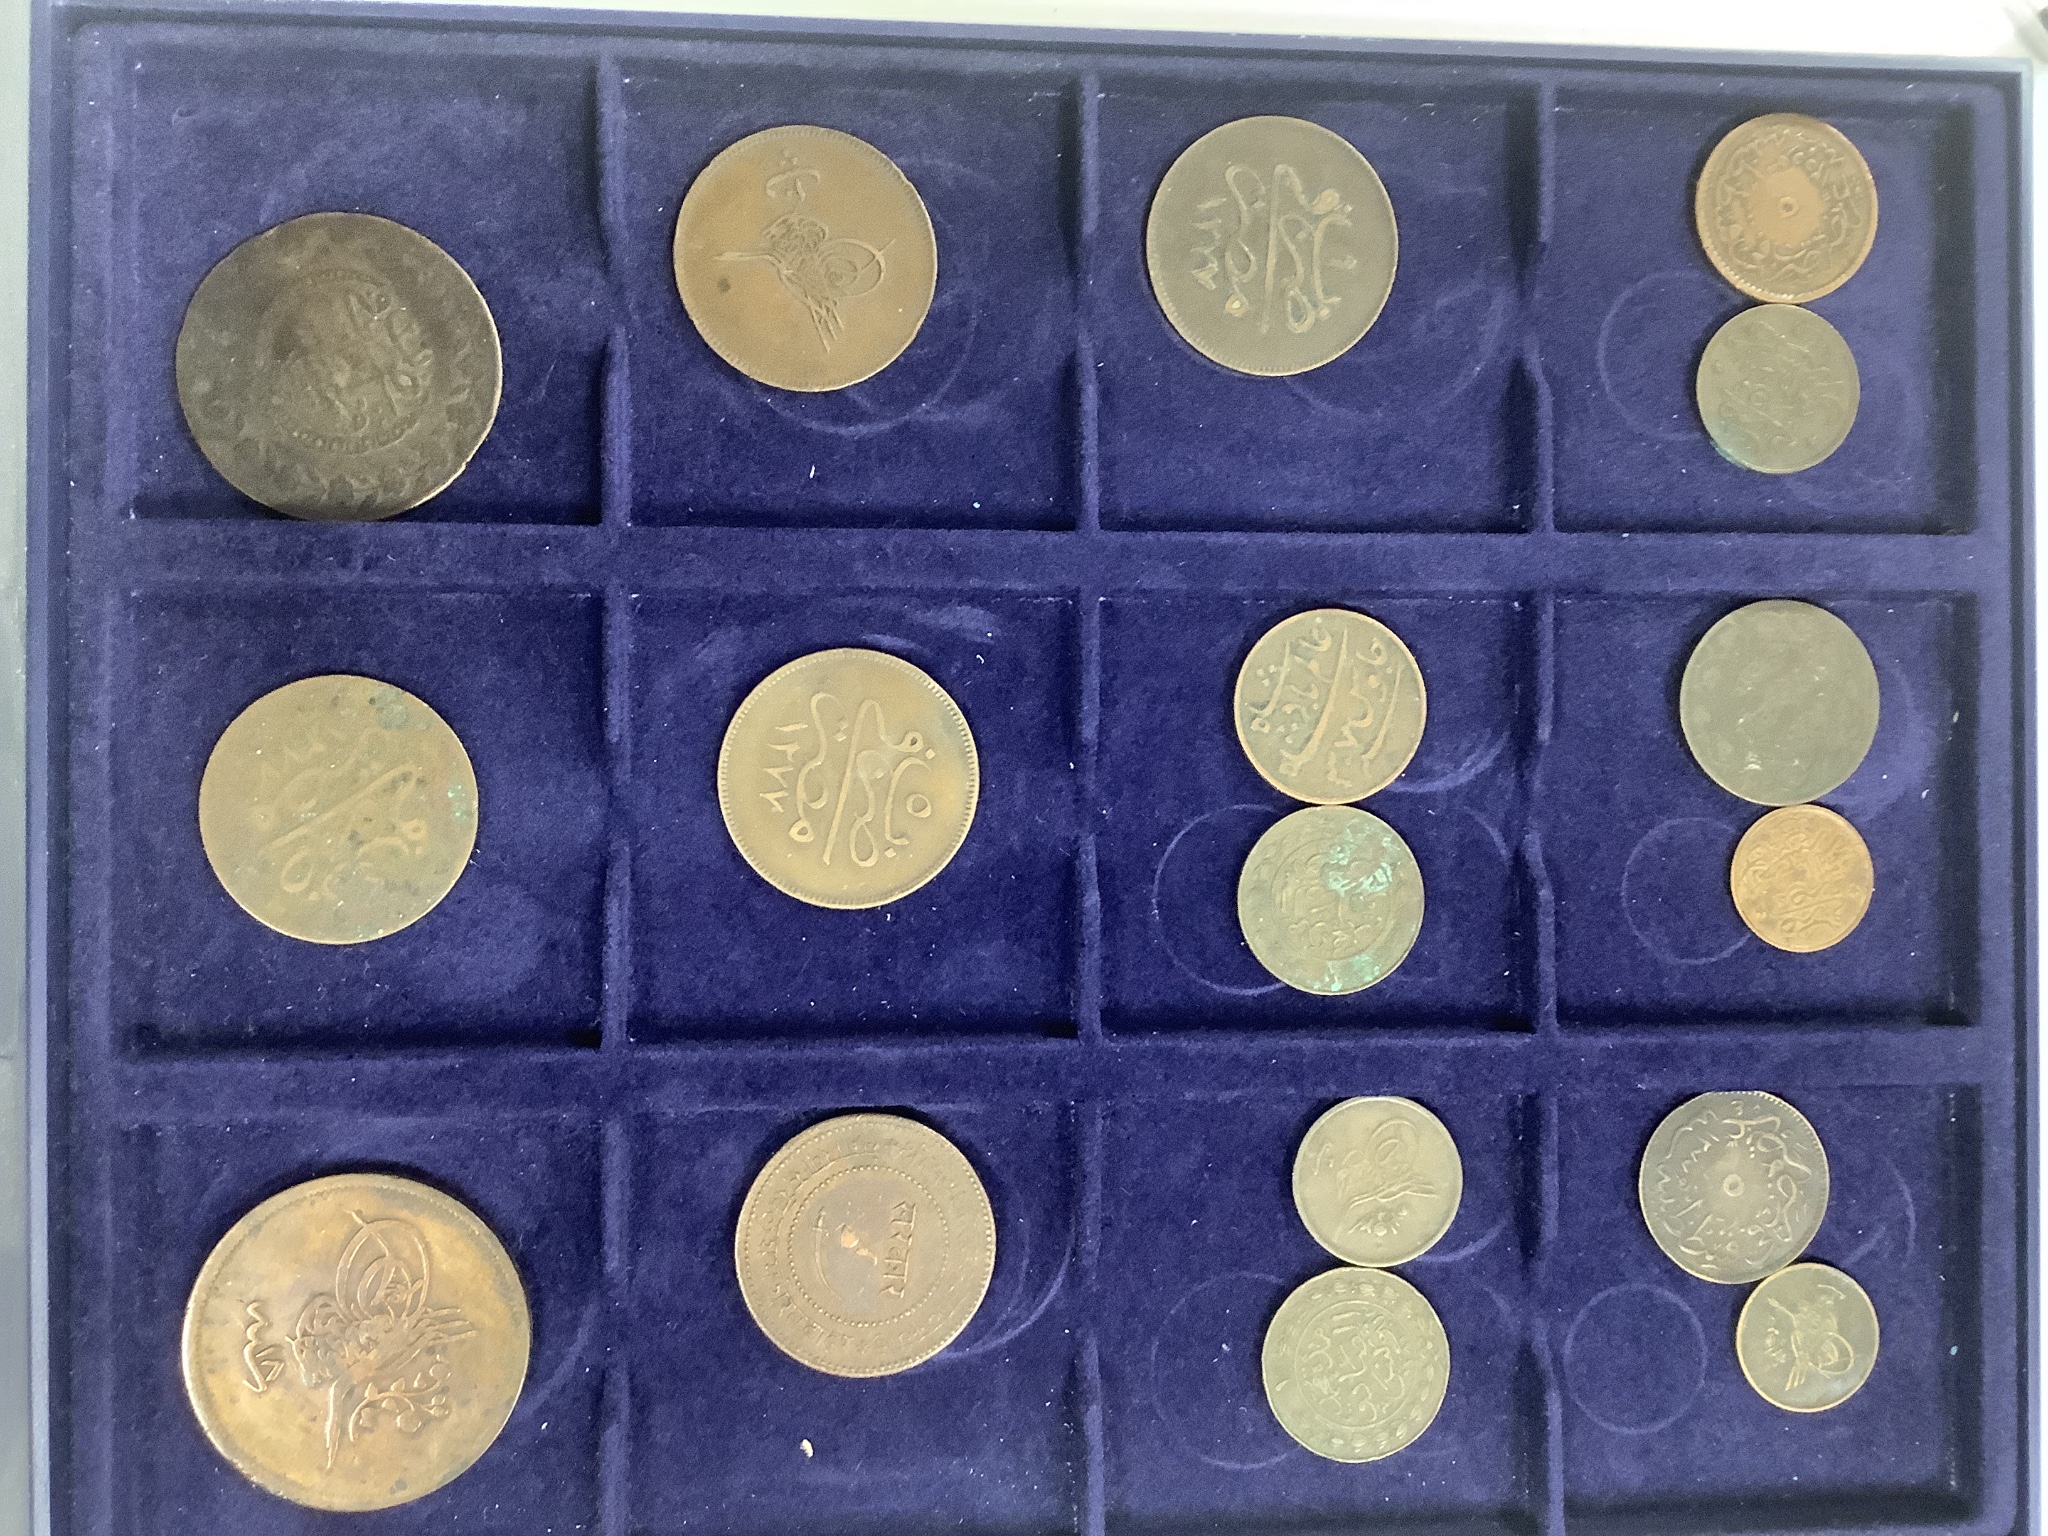 Ottoman Empire and Islamic coins, 19th/20th century, silver and bronze coinage, 12 trays - Image 7 of 13